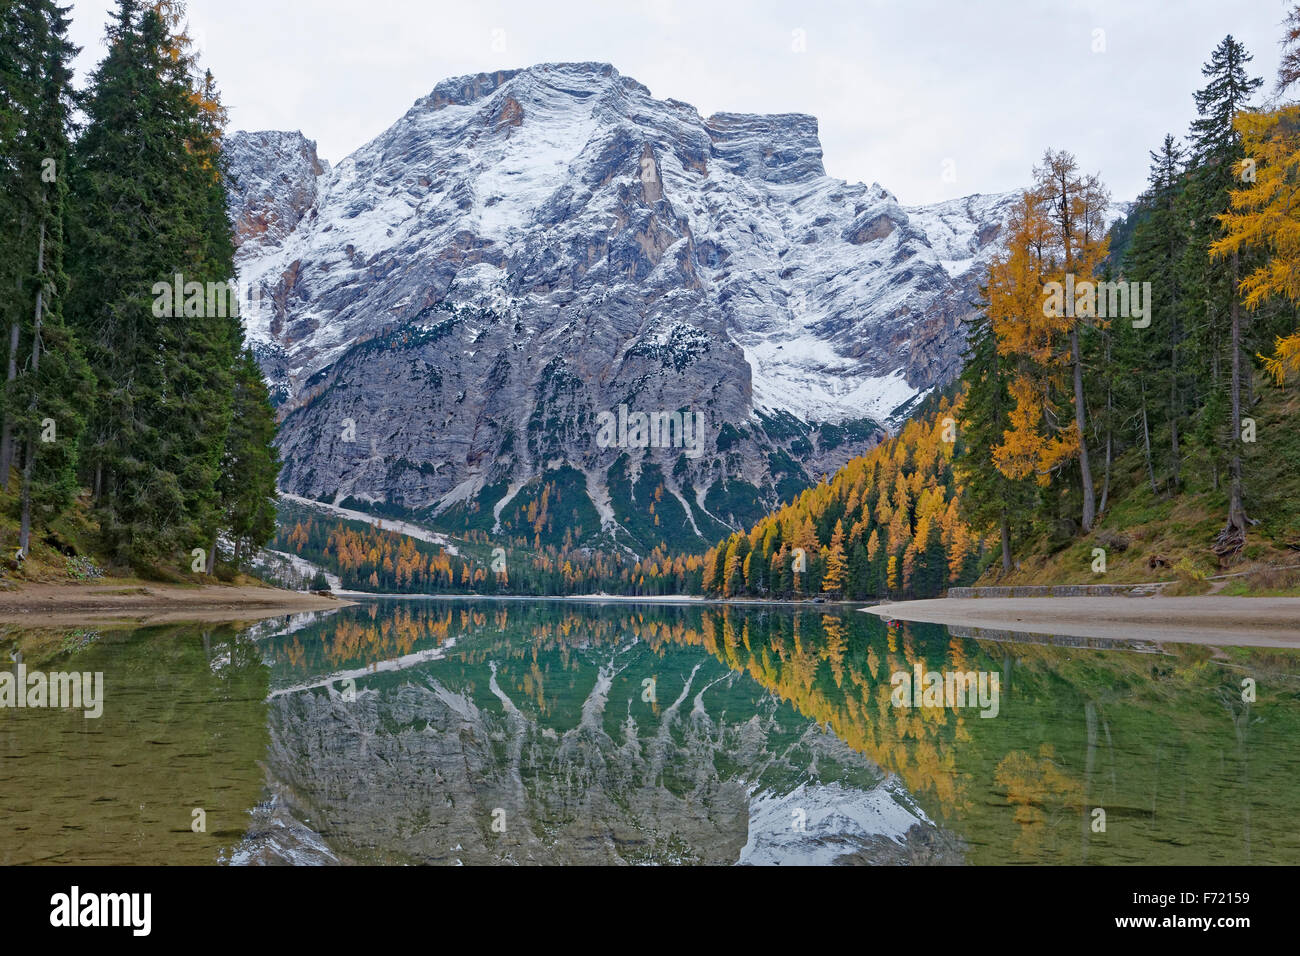 Larch trees with autumnal discolouring, reflections in Pragser Wildsee or Lake Prags, Dolomites, South Tyrol, Italy, Europe Stock Photo